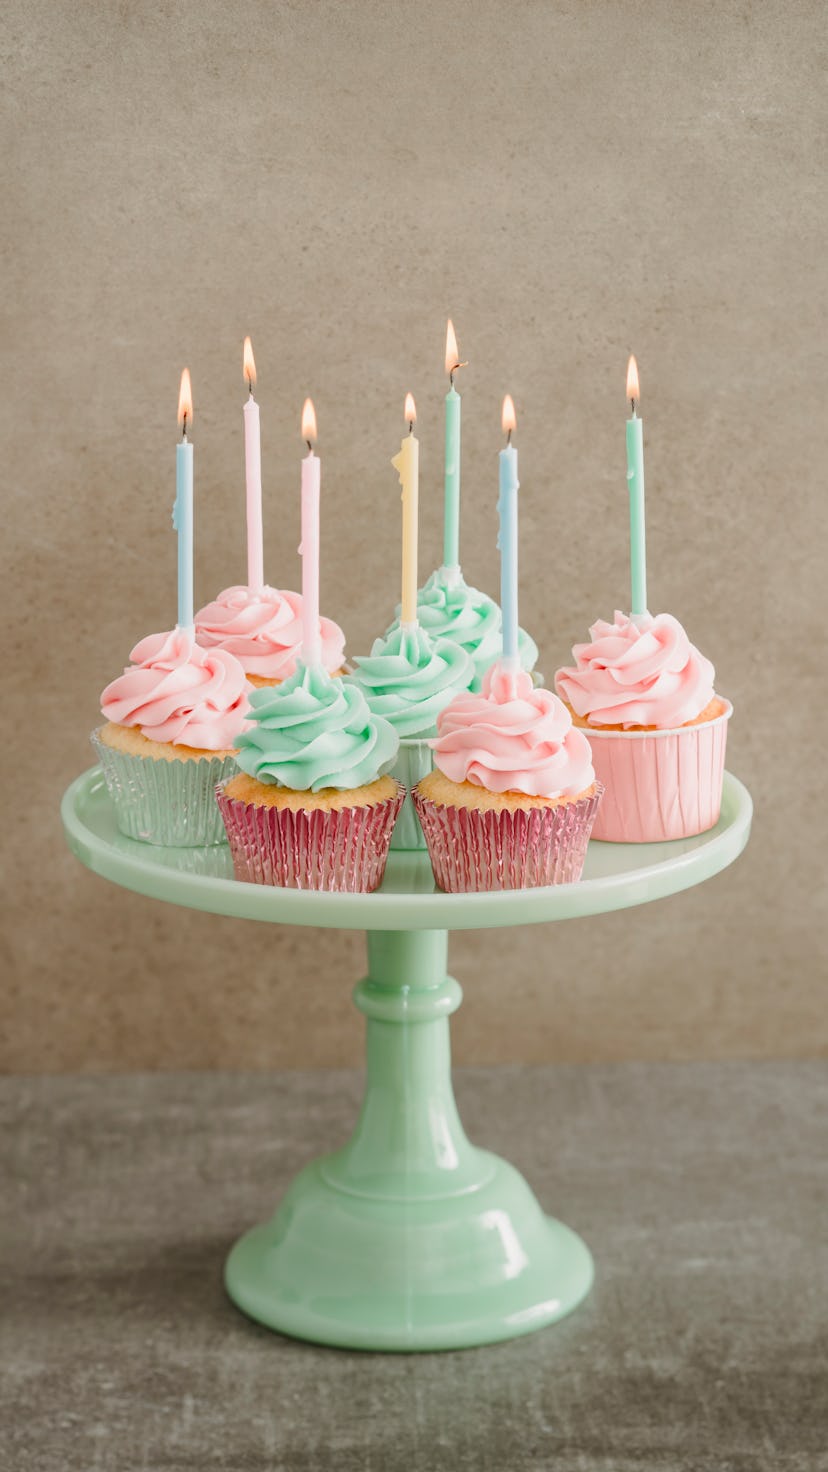 colorful birthday cupcakes on a green milk glass cake stand